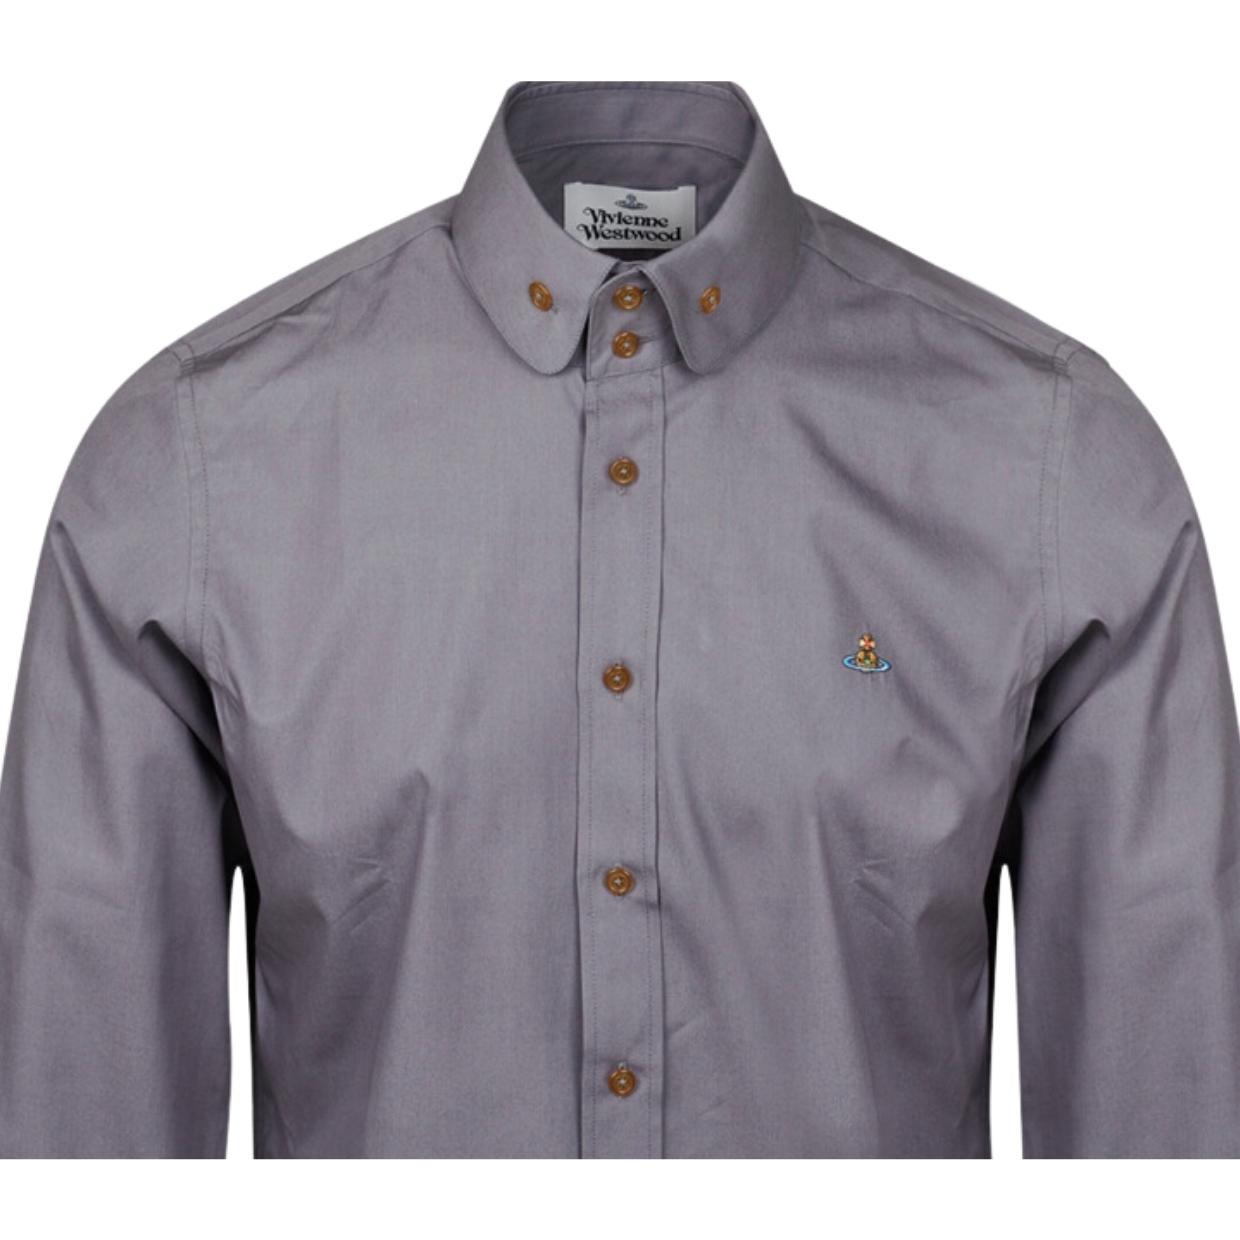 Vivienne Westwood Grey Two Button Krall Shirt